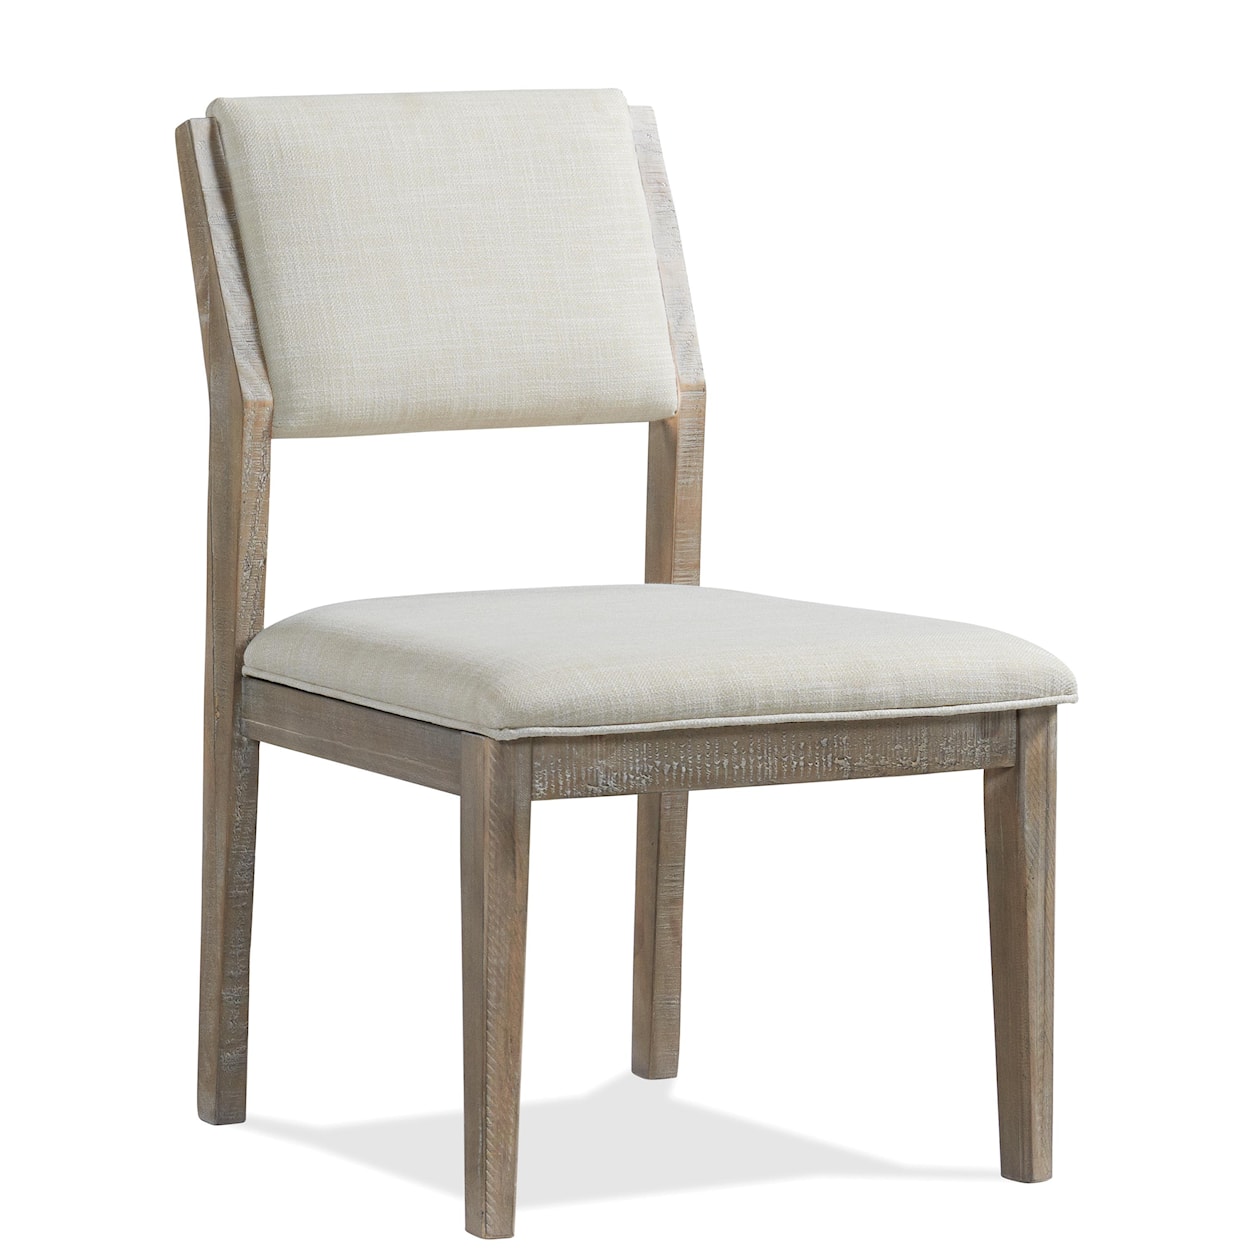 Riverside Furniture Intrigue Upholstered Side Chair